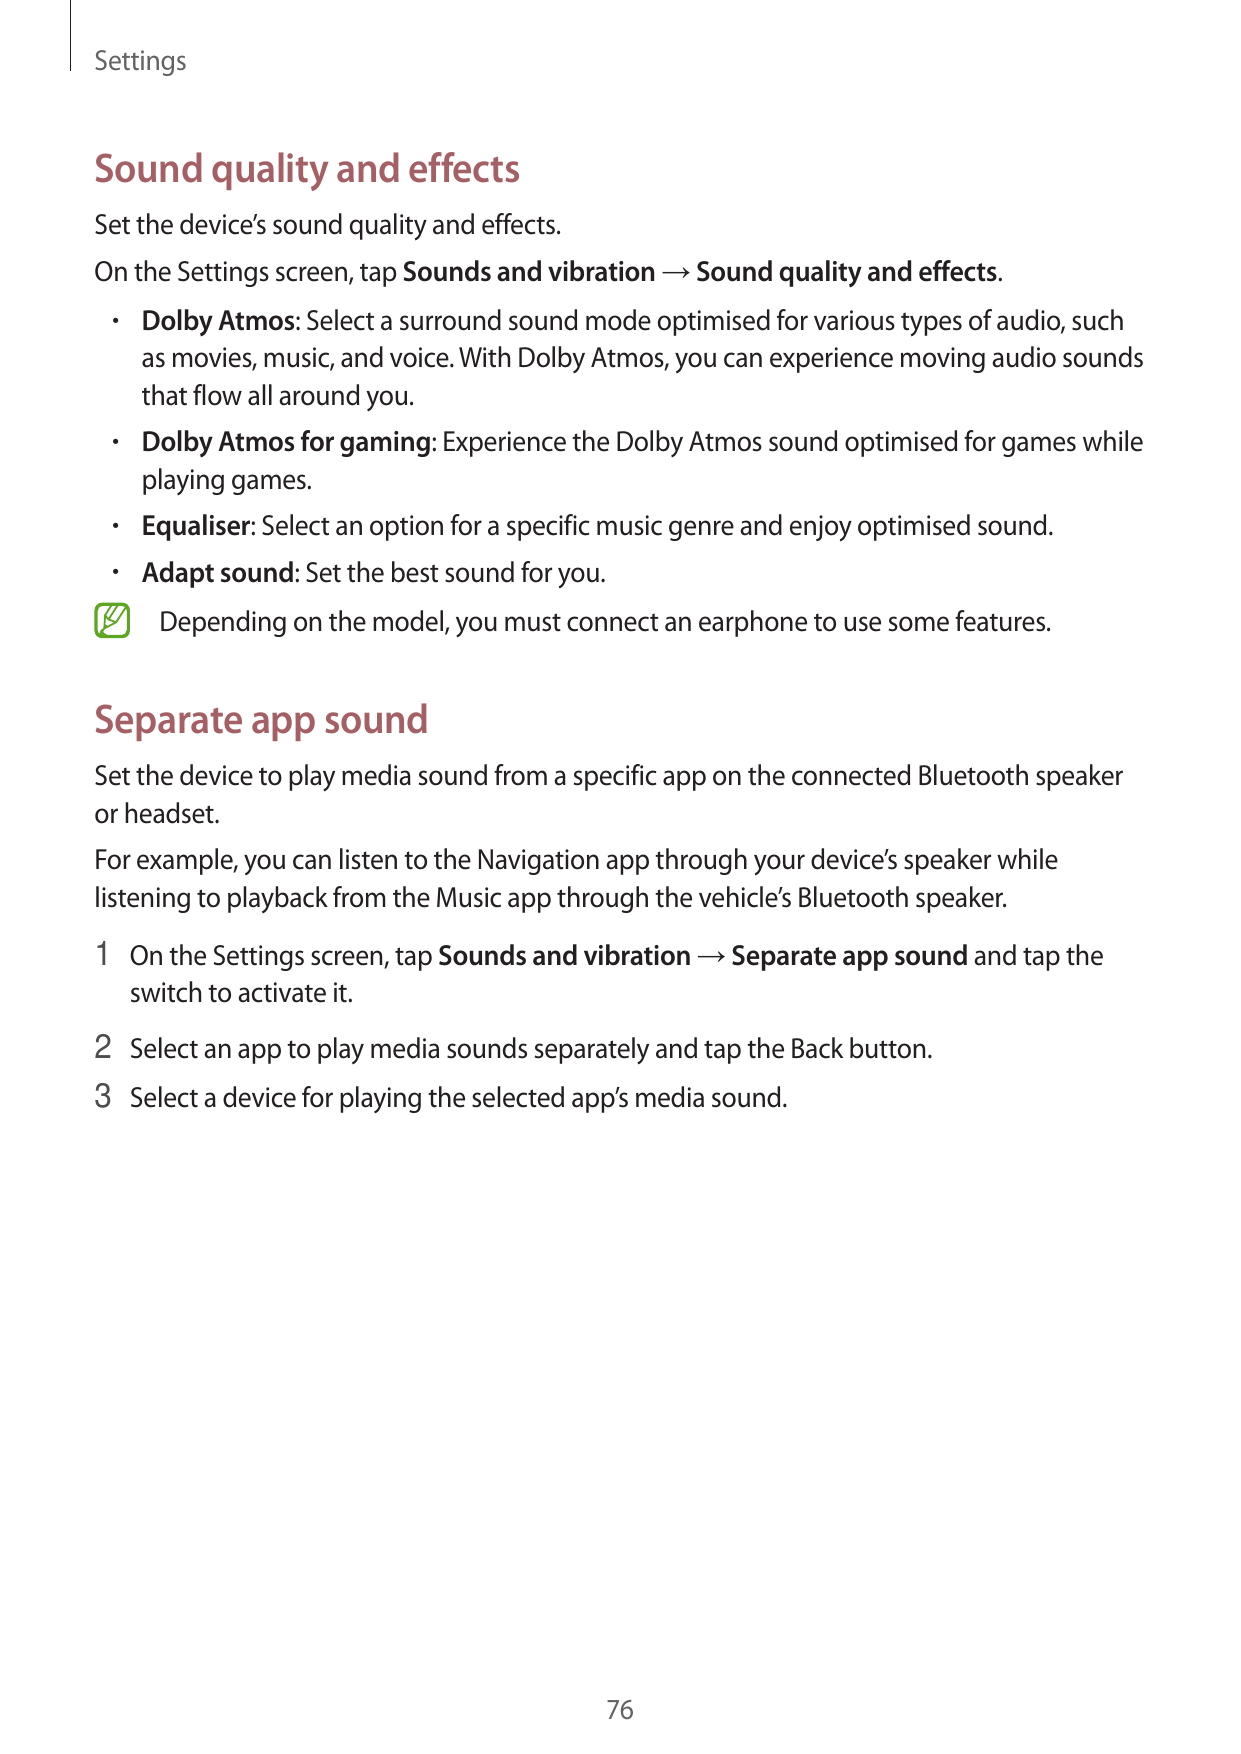 SettingsSound quality and effectsSet the device’s sound quality and effects.On the Settings screen, tap Sounds and vibration → S